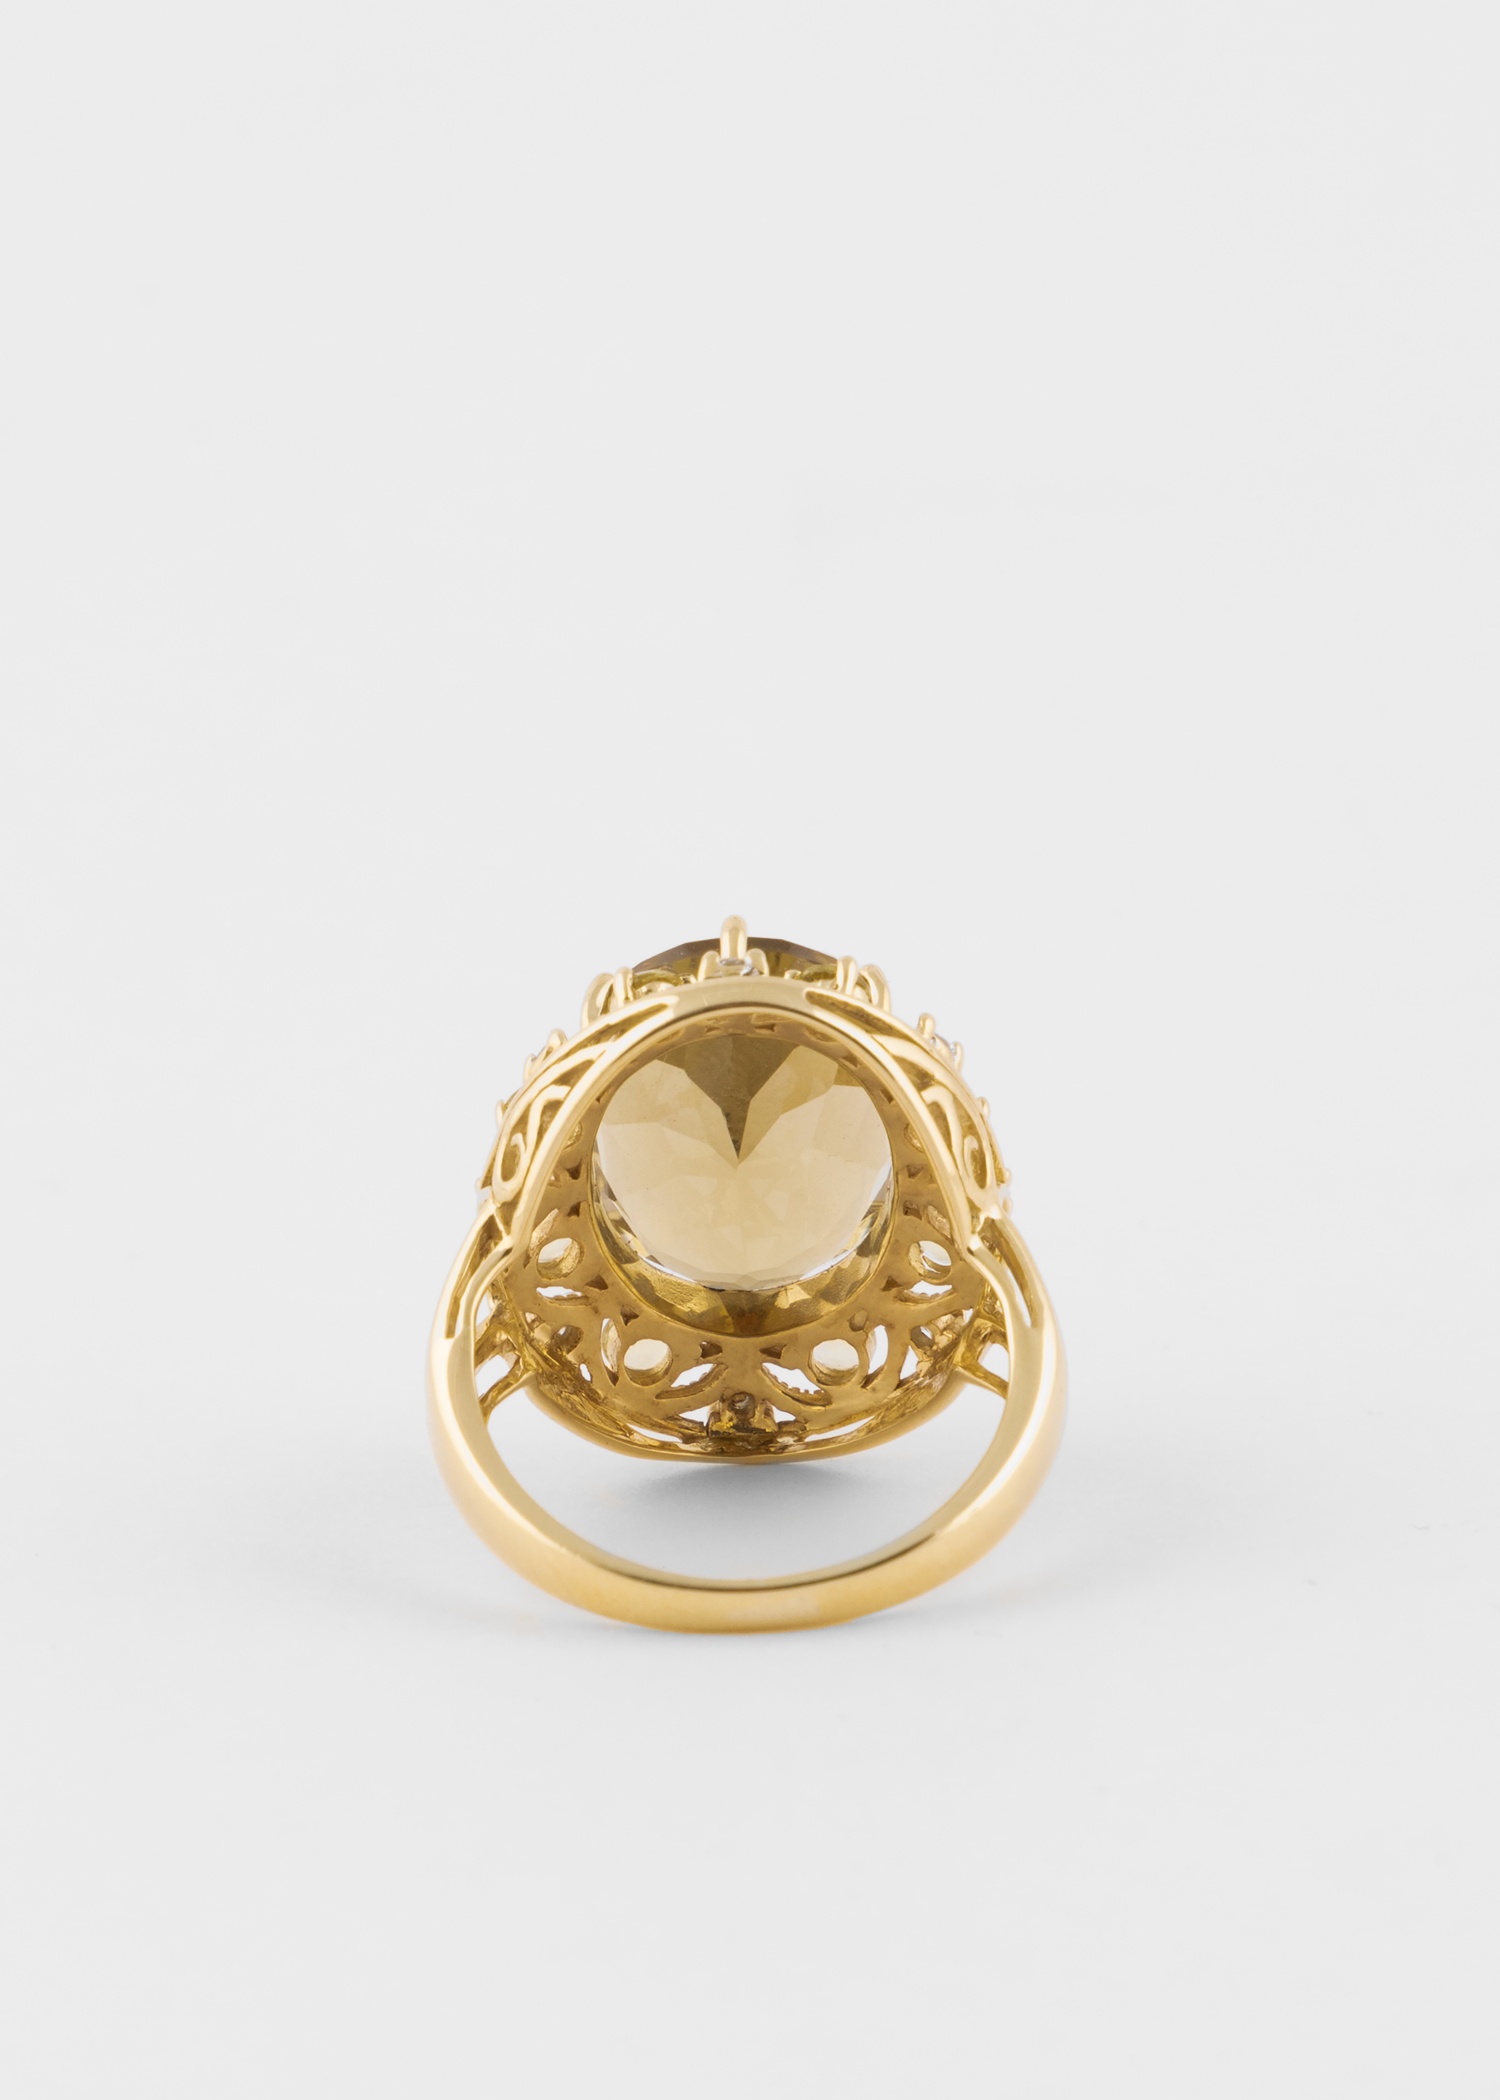 Diamond and Oro Verde Gold Cocktail Ring by Baroque Rocks - 4